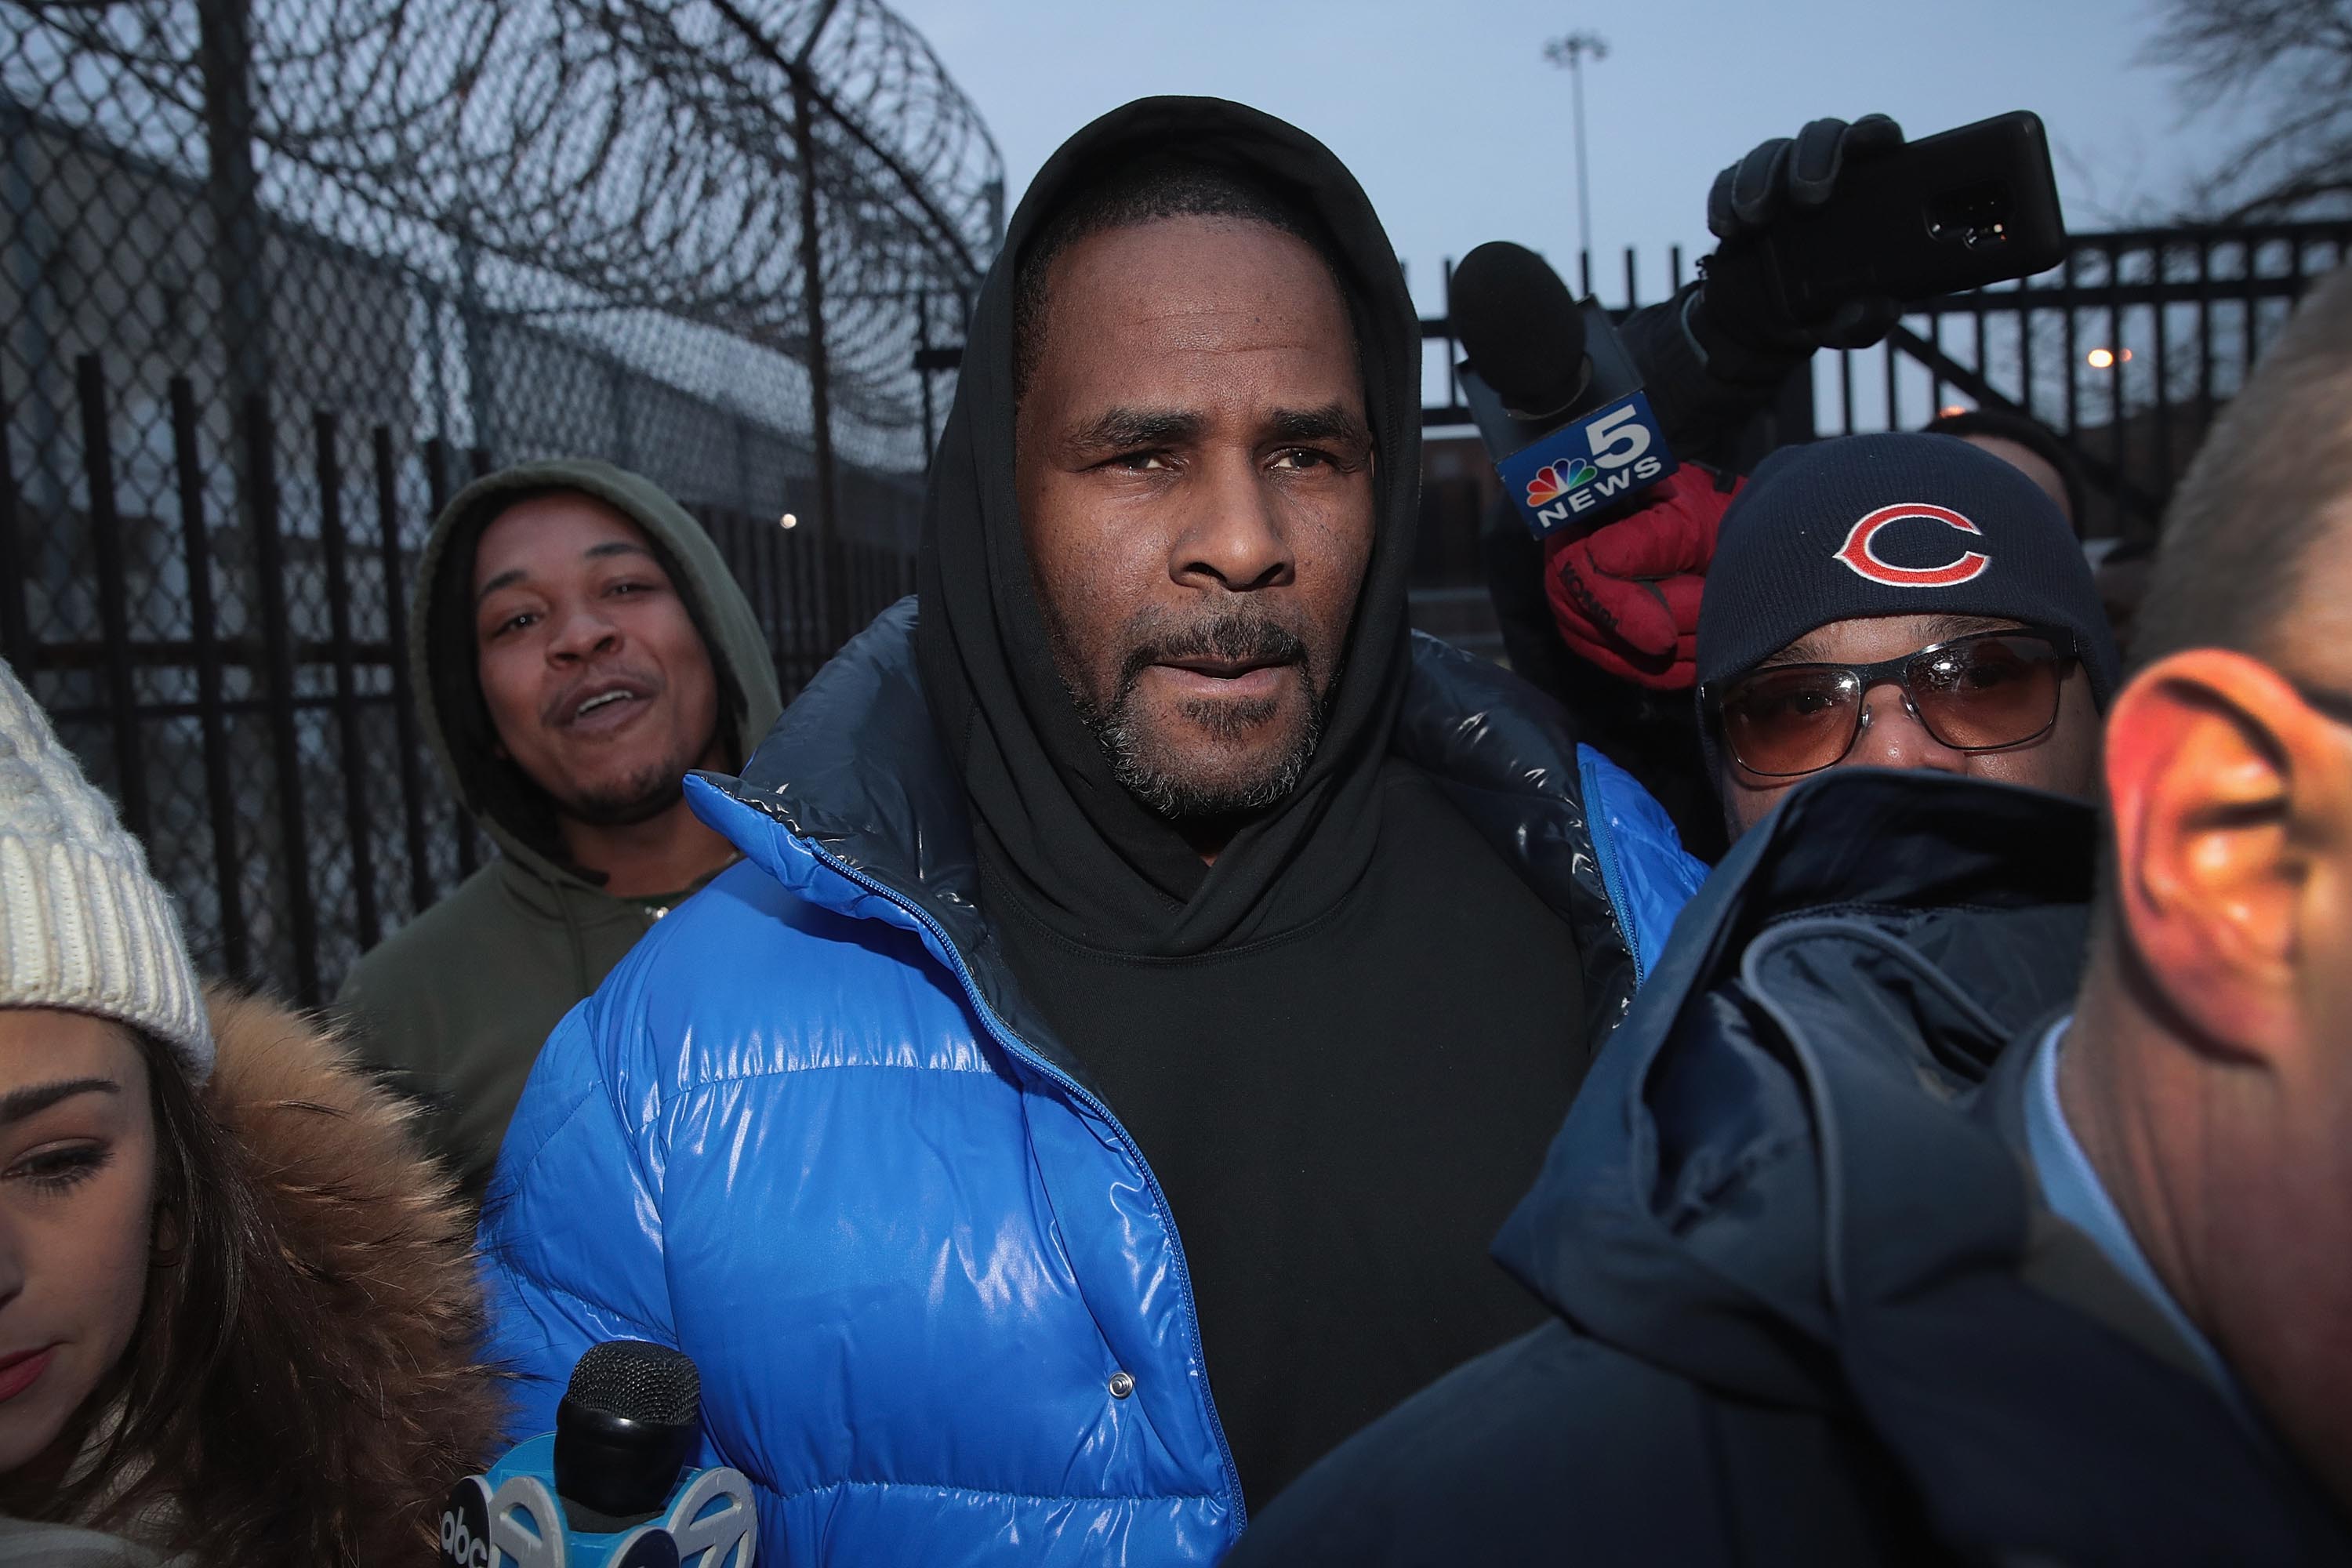 R. Kelly leaves the Cook County jail after posting $100 thousand bond on February 25, 2019 in Chicago, Illinois. | Photo: GettyImages